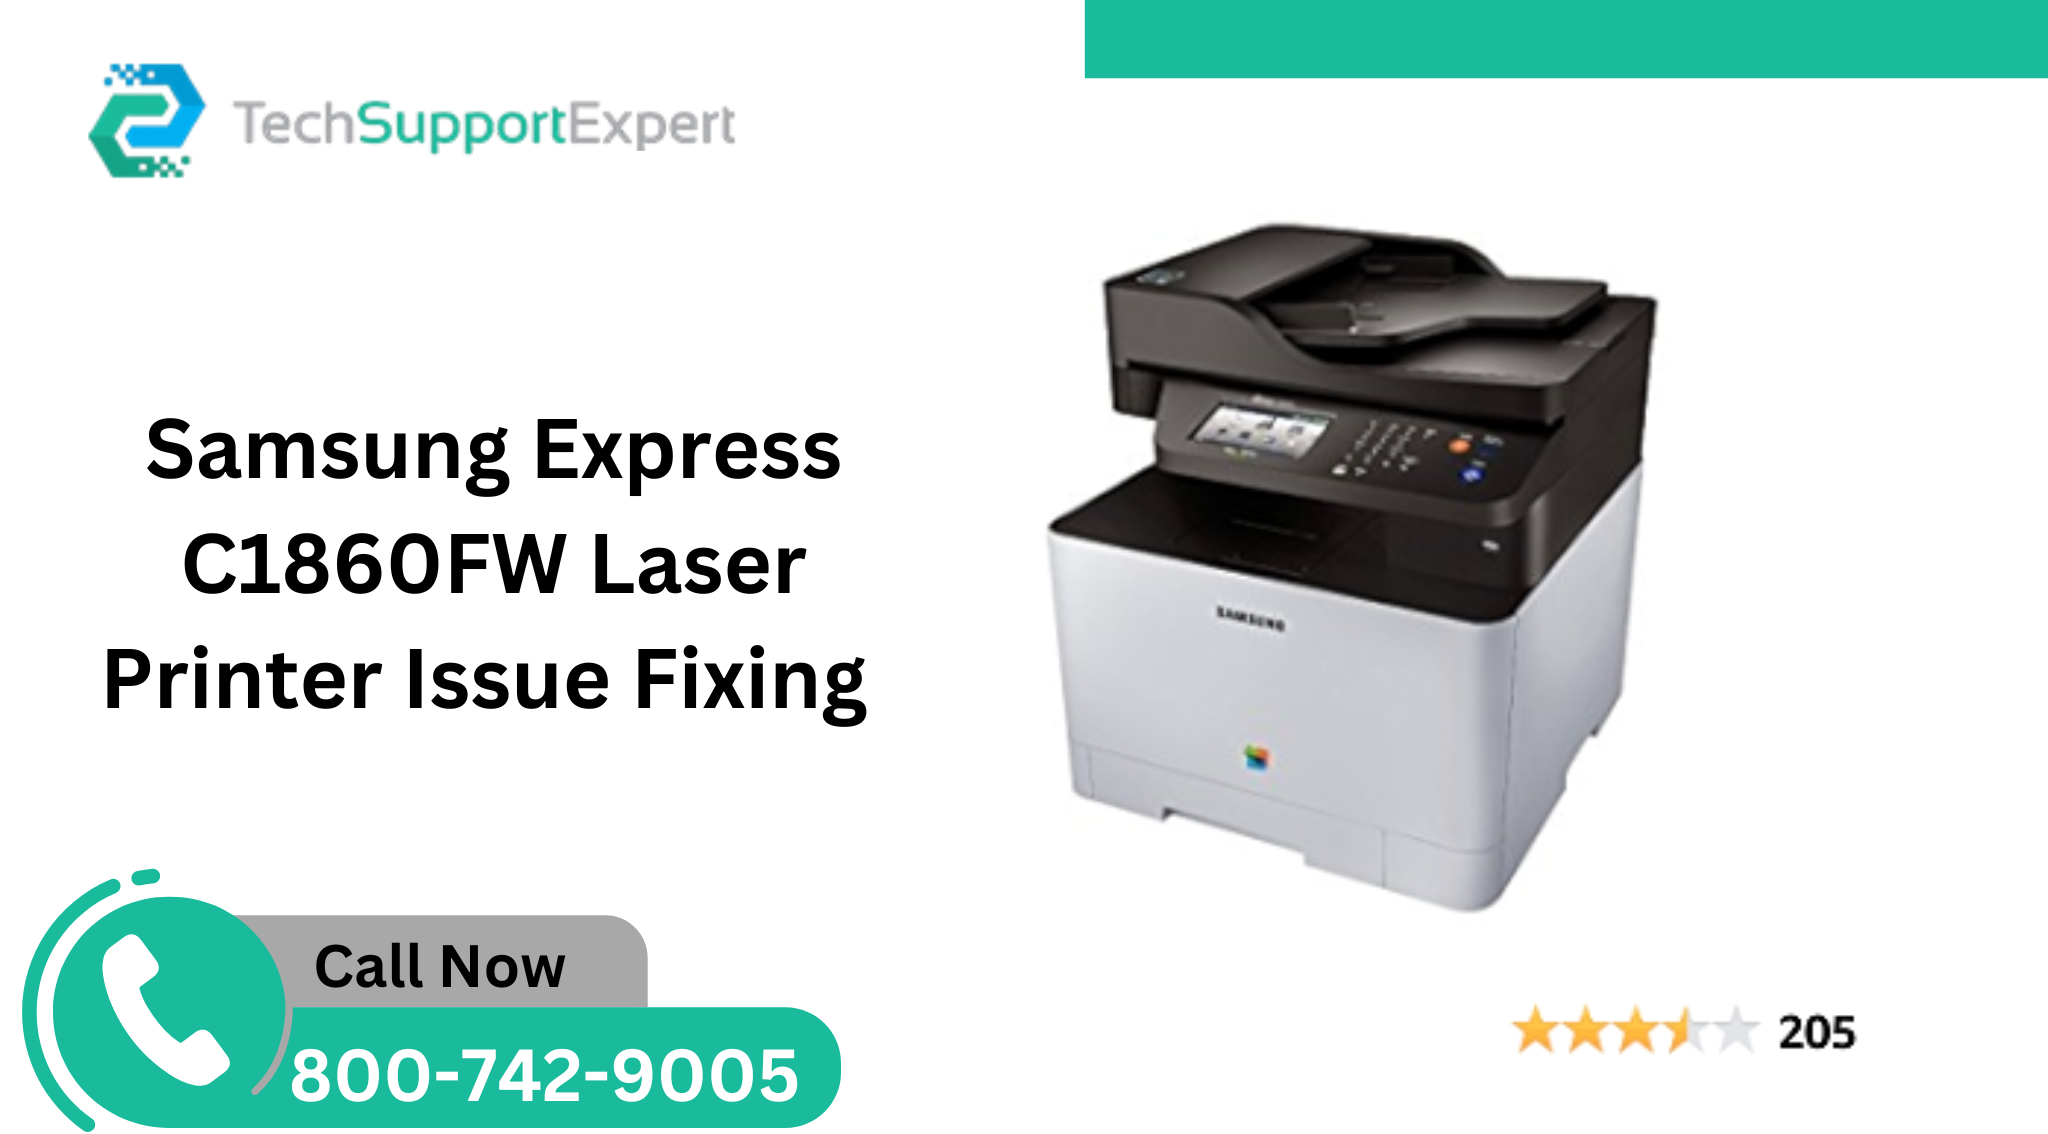 Samsung Express C1860FW Laser Printer Issue Fixing